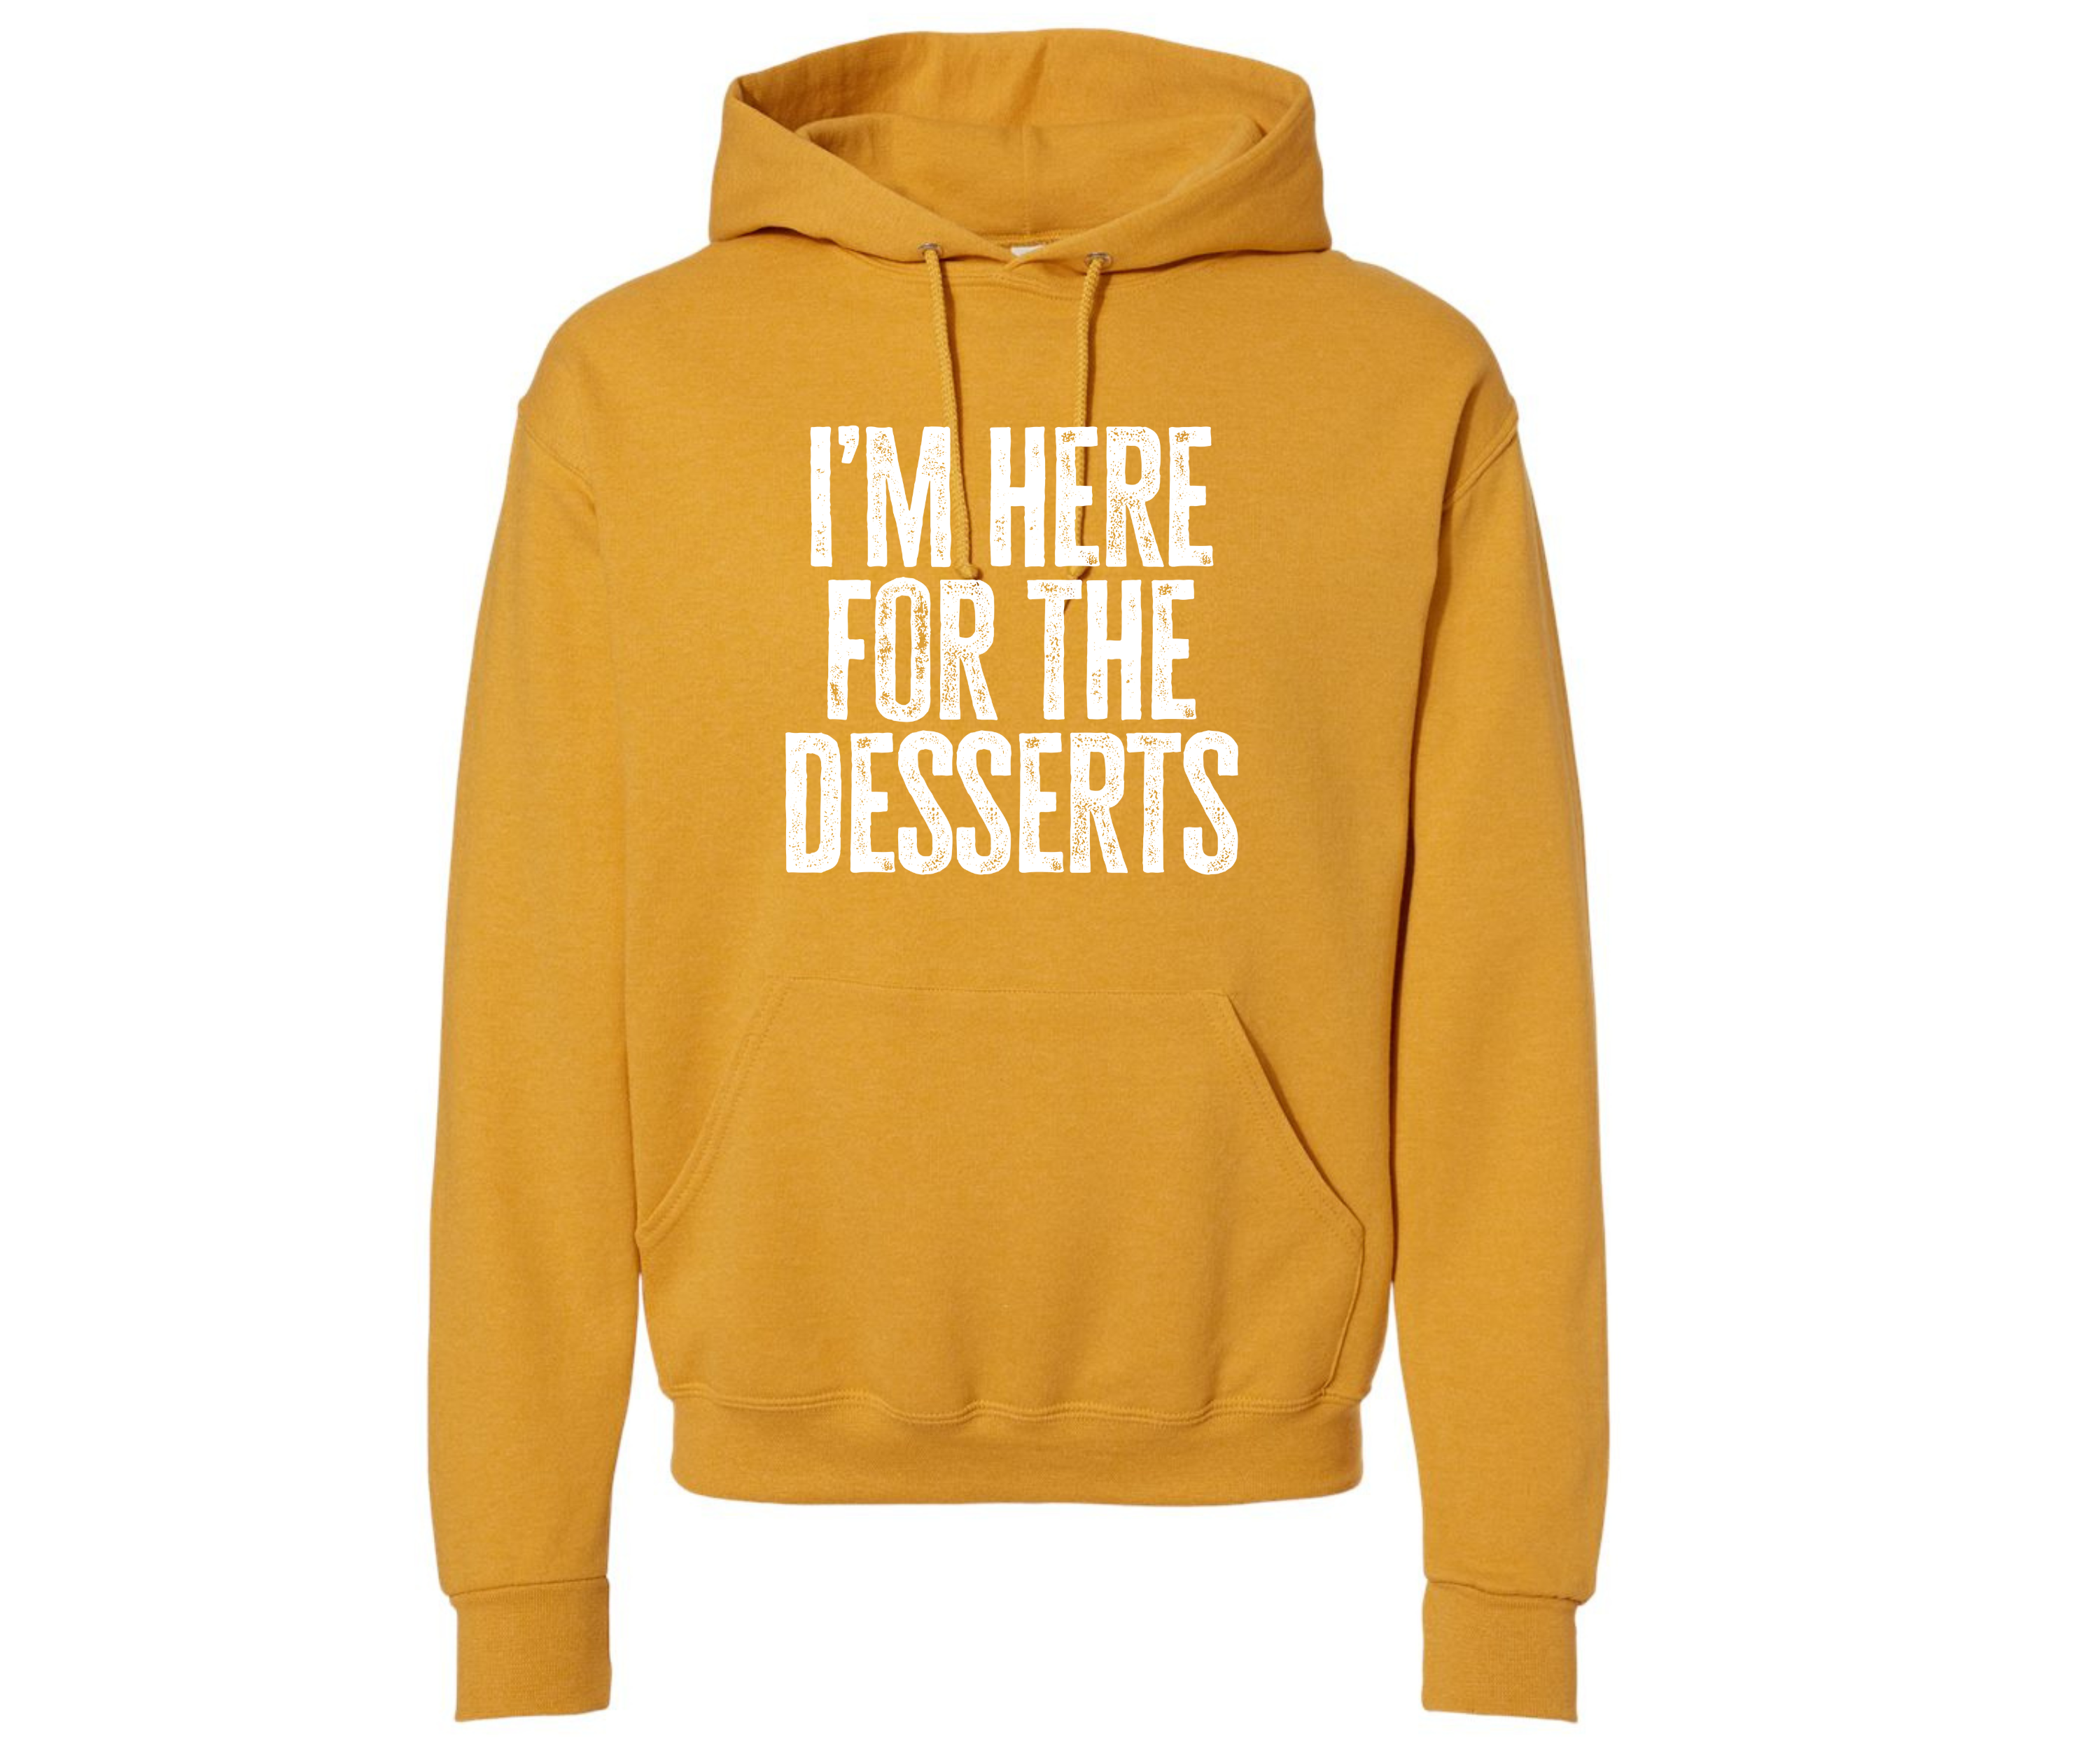 I'm Here For The Deserts Family Matching Hooded Sweatshirt-clothing and culture-shop here at-A Perfect Shirt